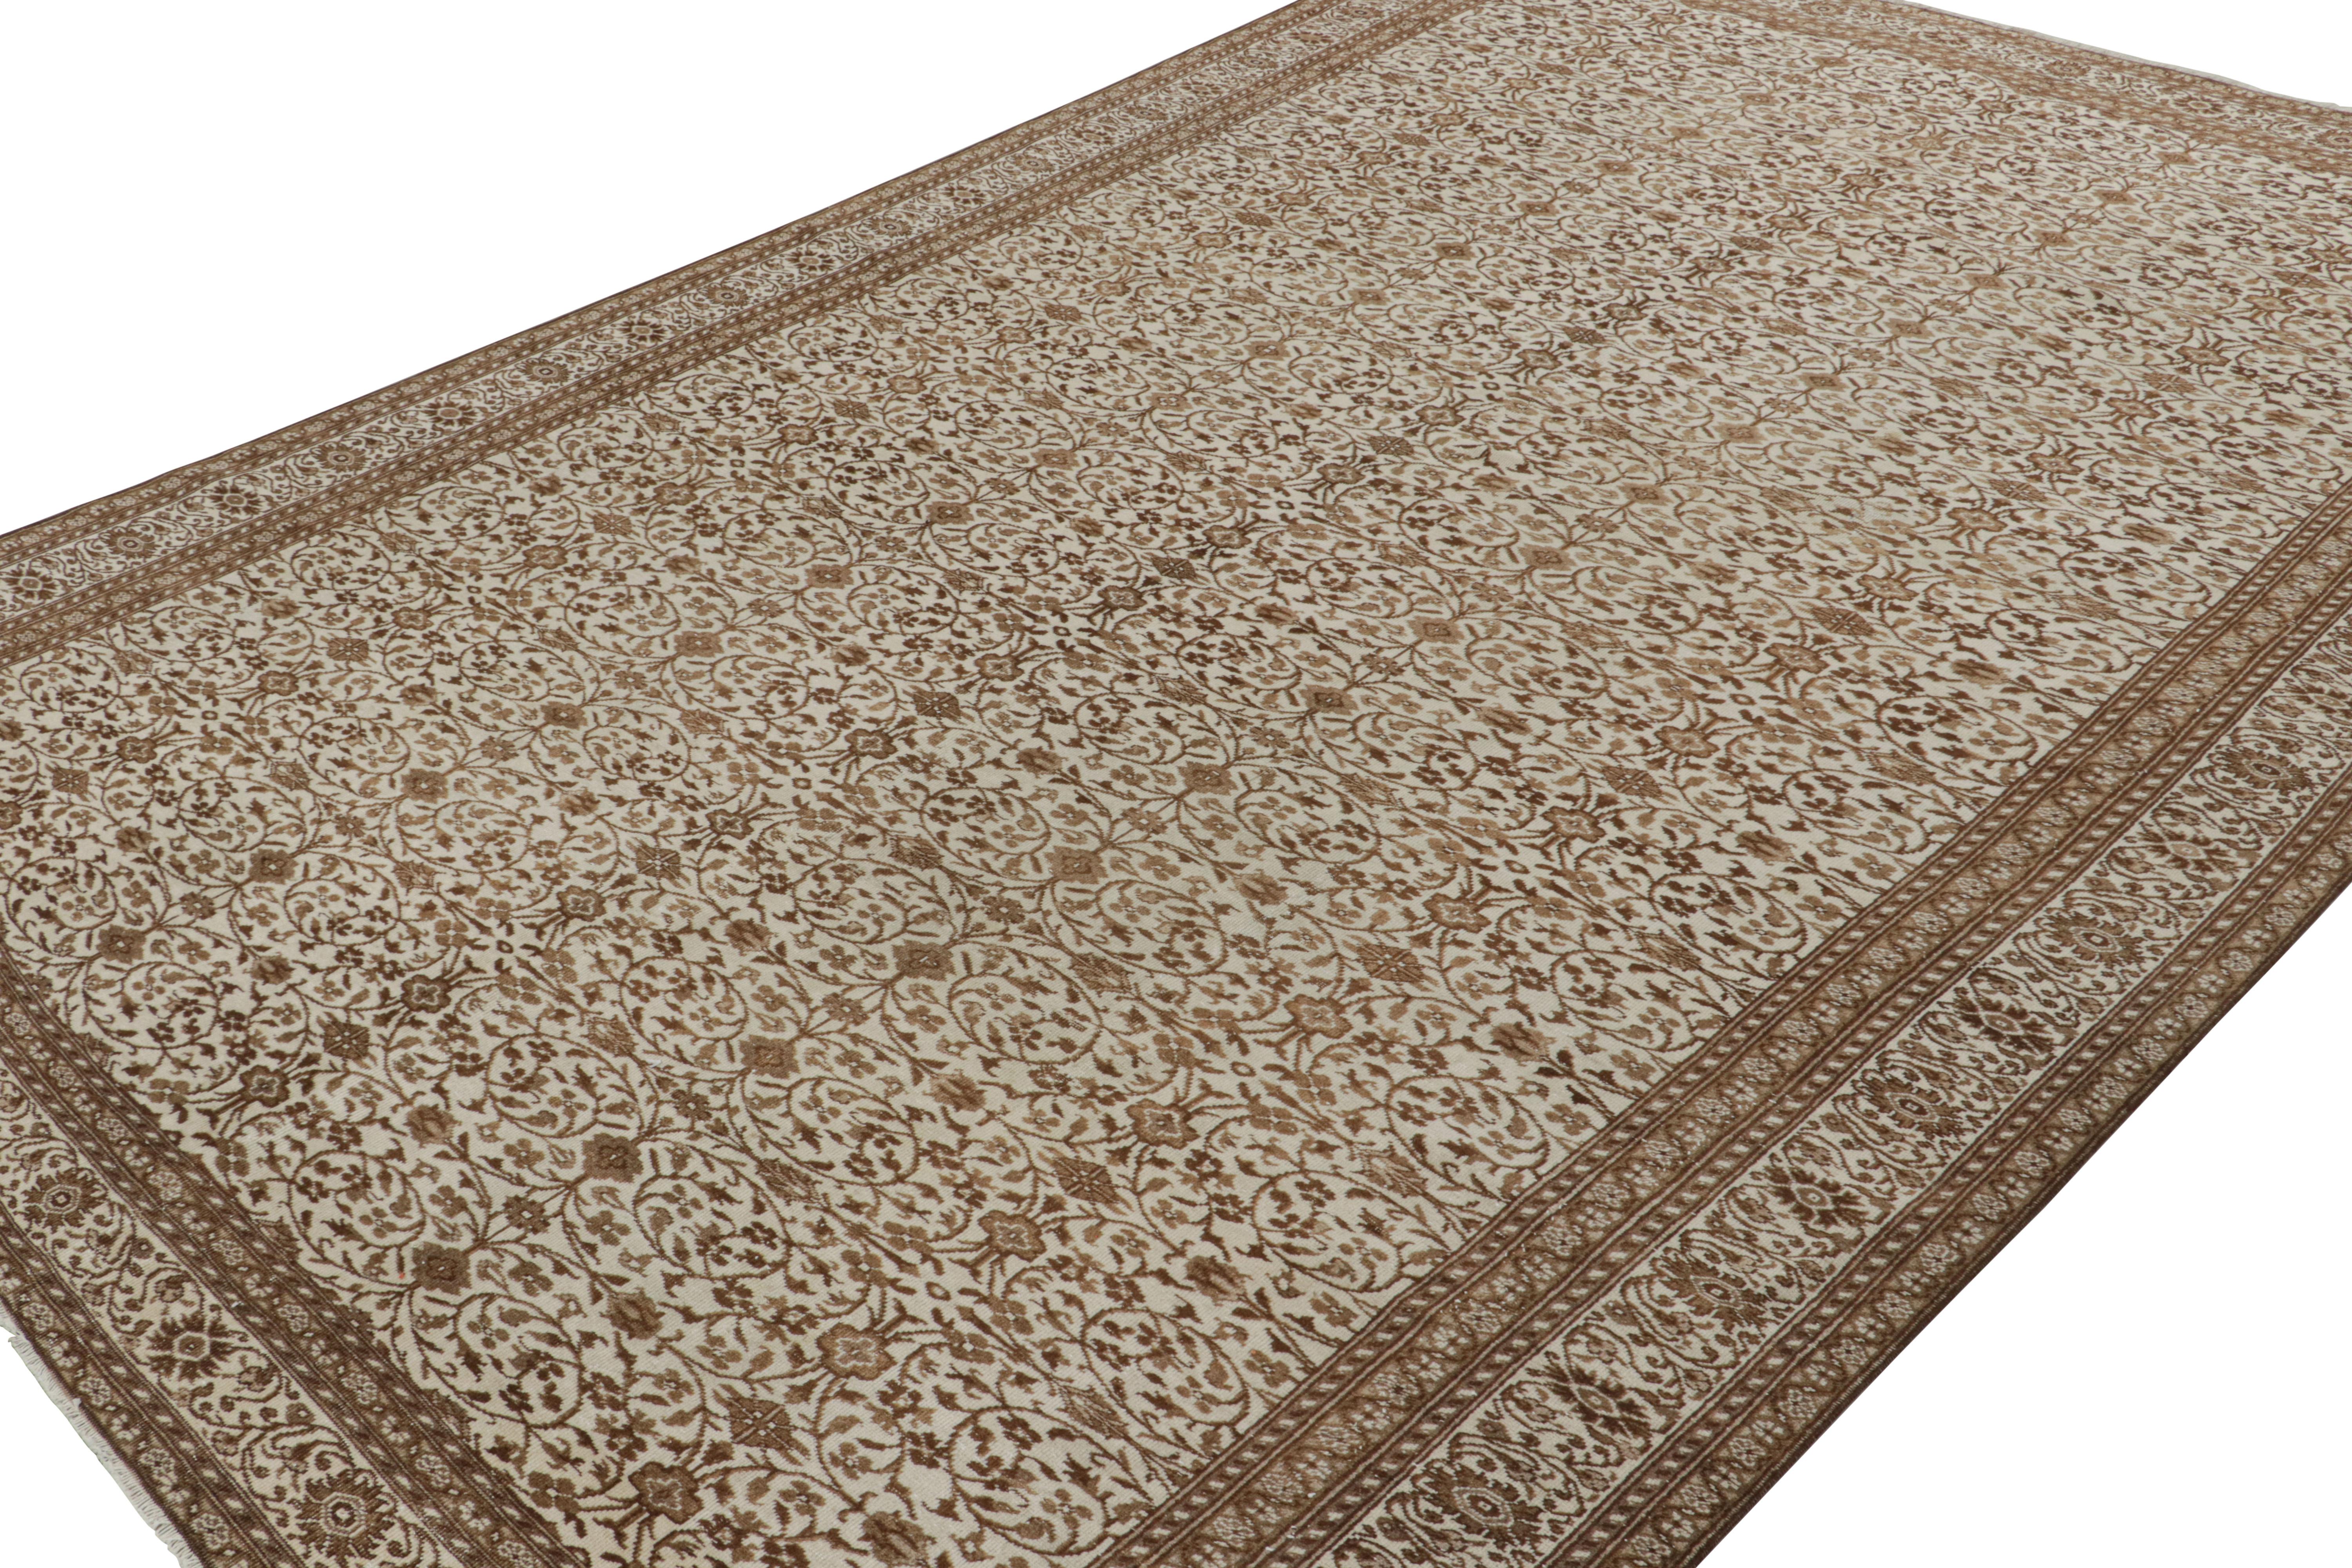 Hand-knotted in wool, this 8x12 vintage Sivas rug, circa 1950-1960, features intricate Herati patterns in rich browns all over the beige surface with off-white accents. 

On the design: 

The majestic, intricate nature of this piece attests to